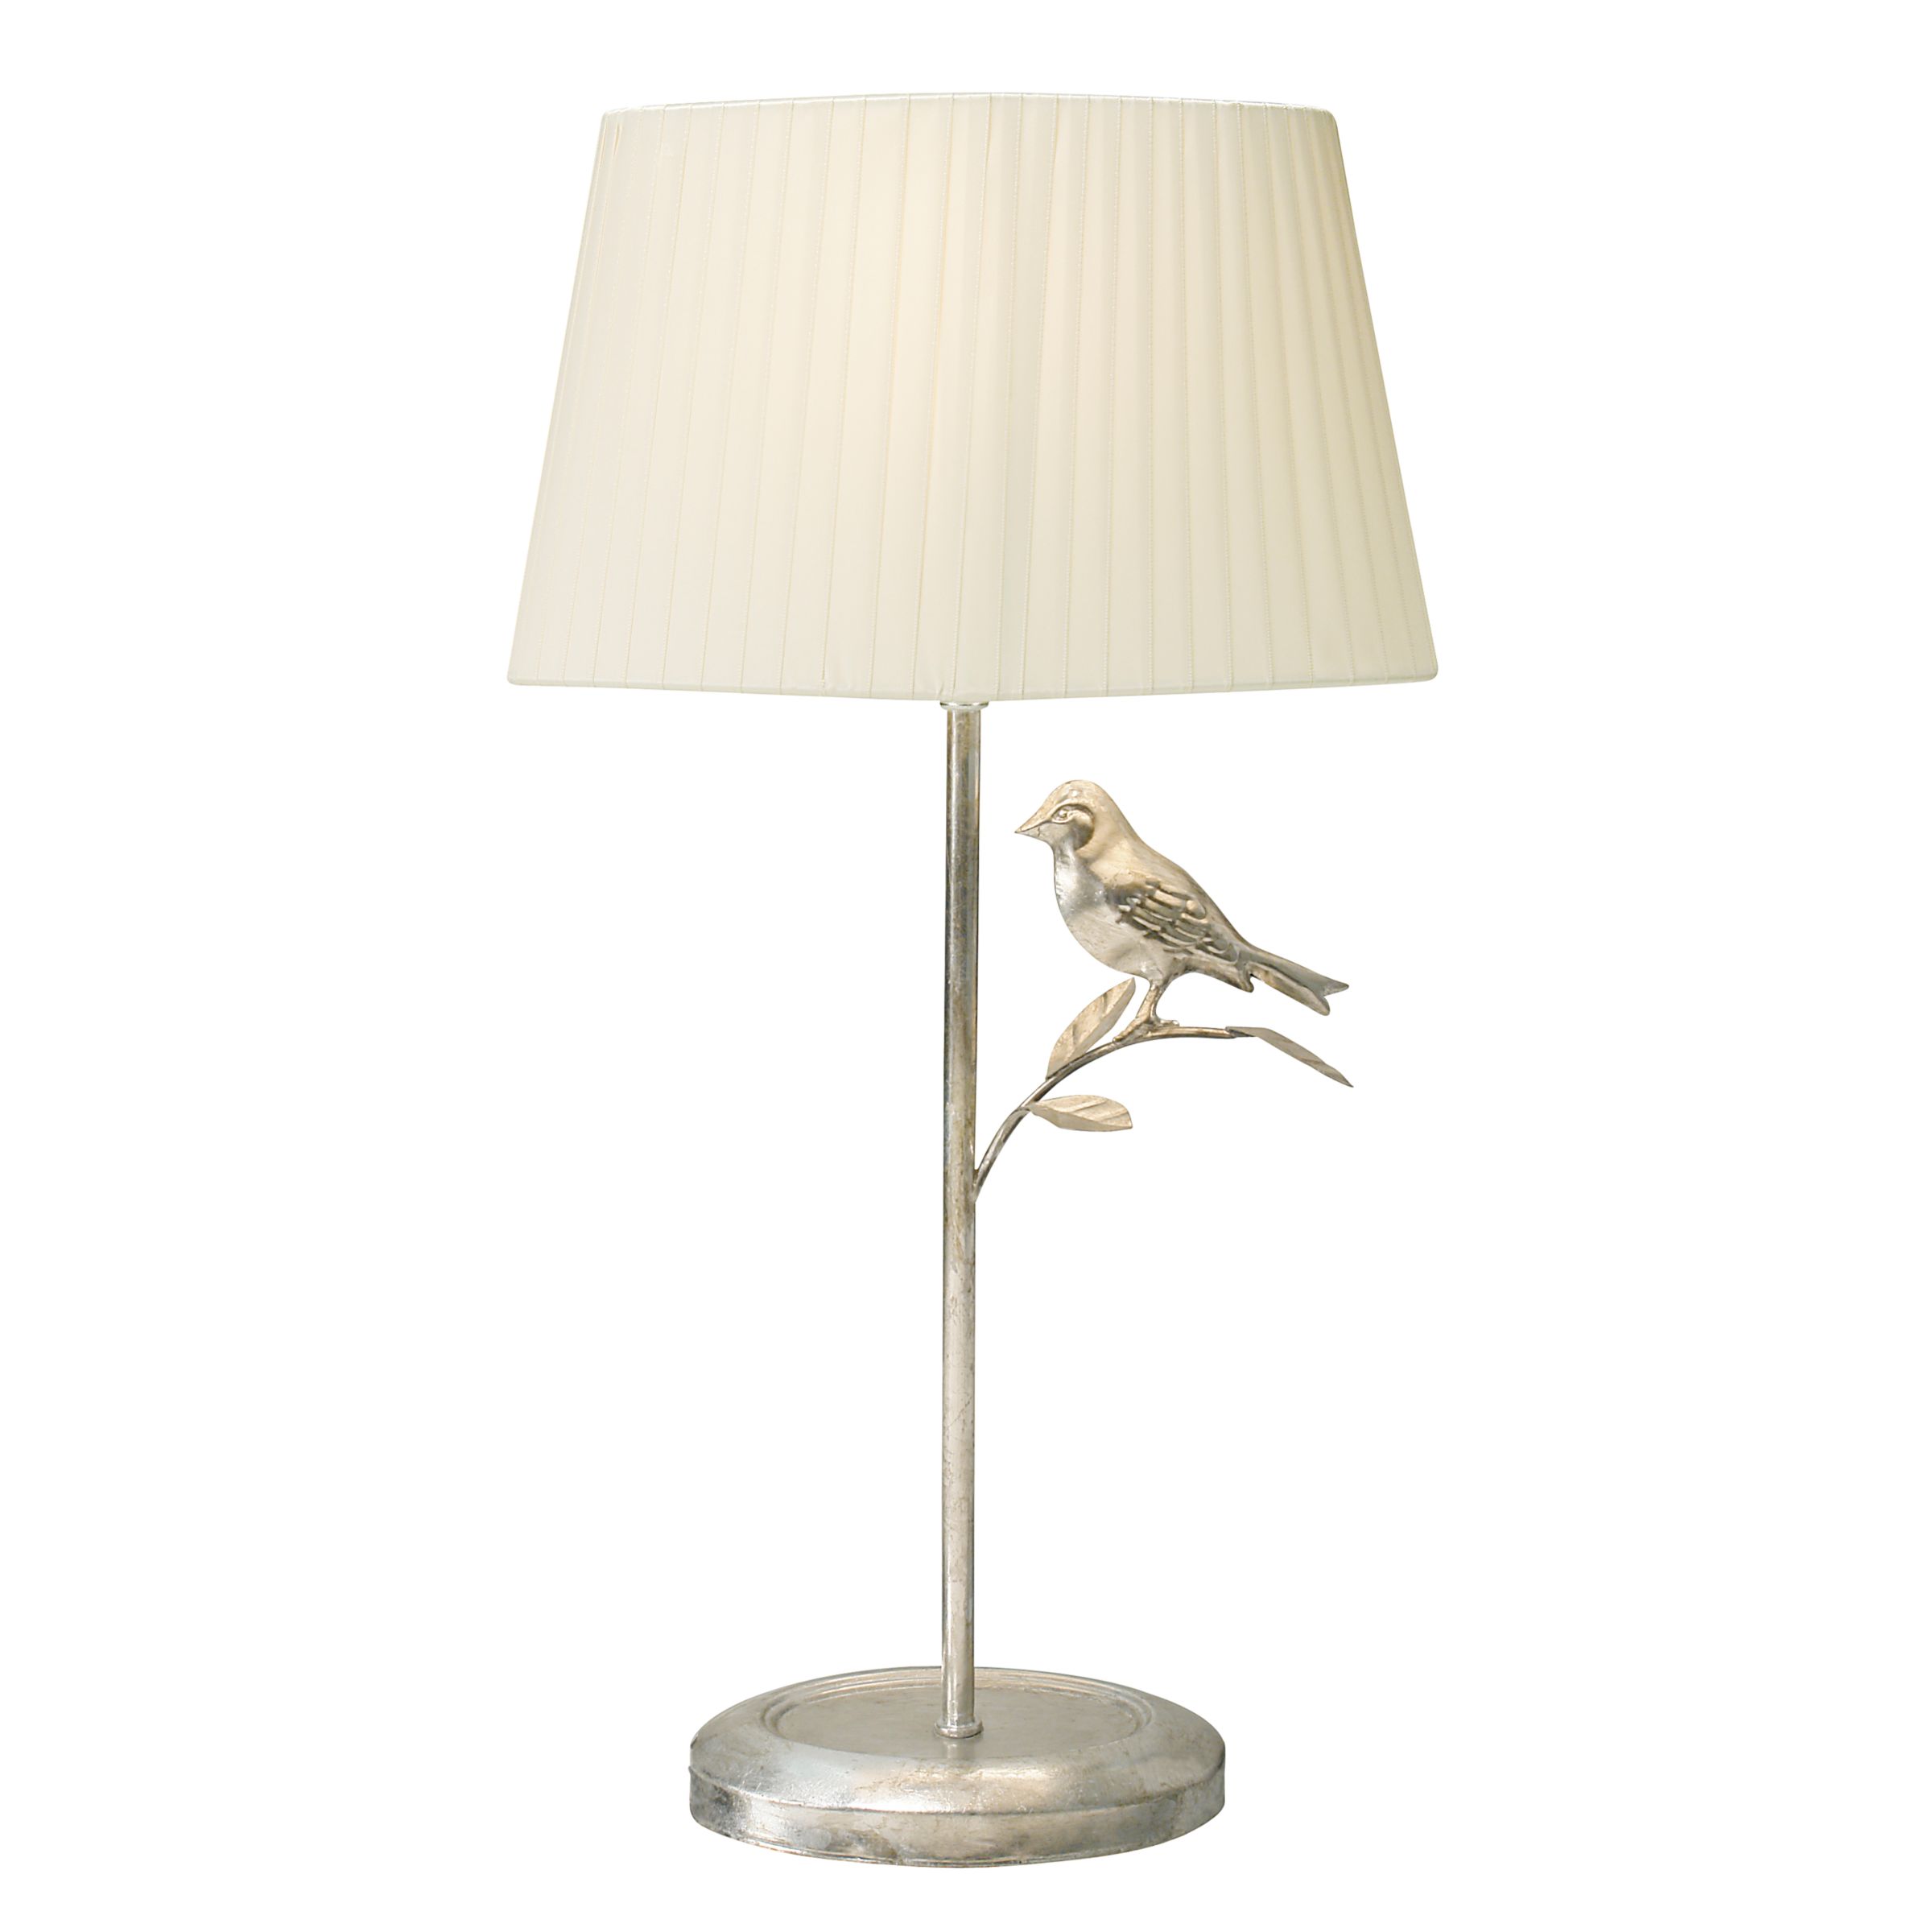 John Lewis Daphne Table Lamp - review, compare prices, buy online